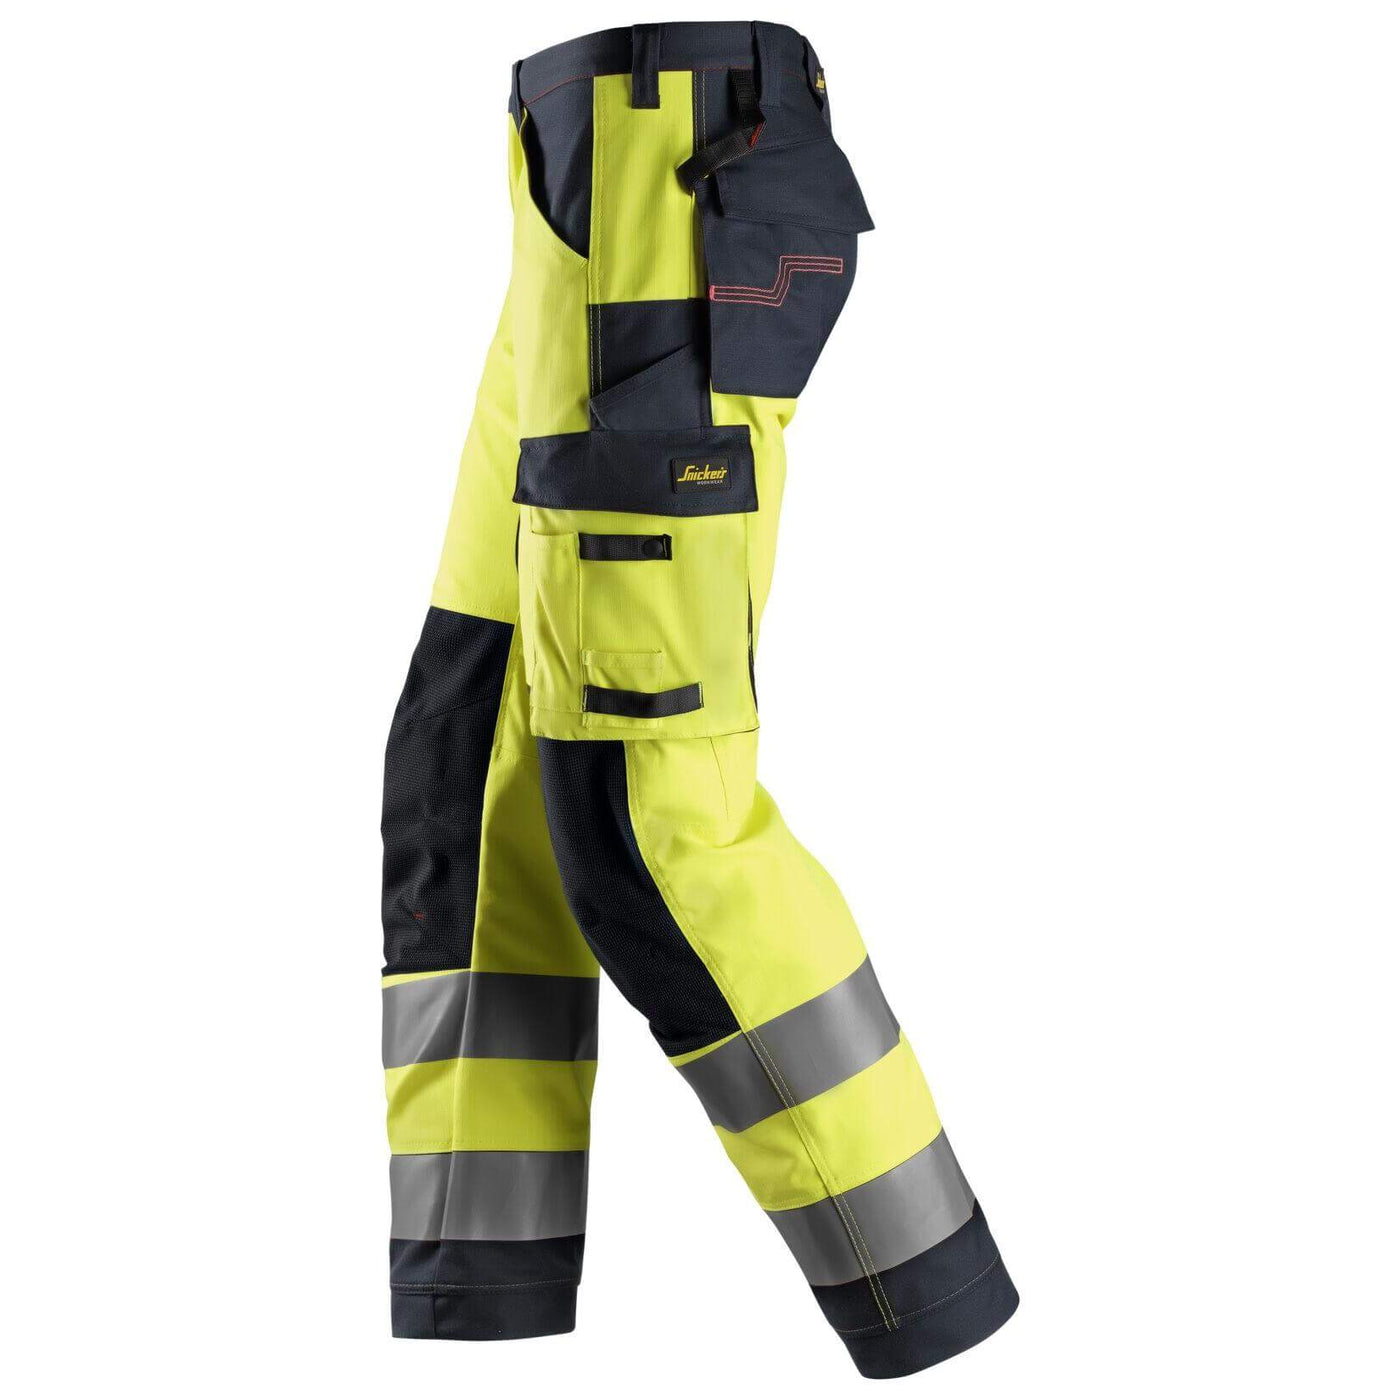 Snickers 6361 ProtecWork Hi Vis Work Trousers with Equal Leg Pockets Class 2 Hi Vis Yellow Navy Blue left #colour_hi-vis-yellow-navy-blue